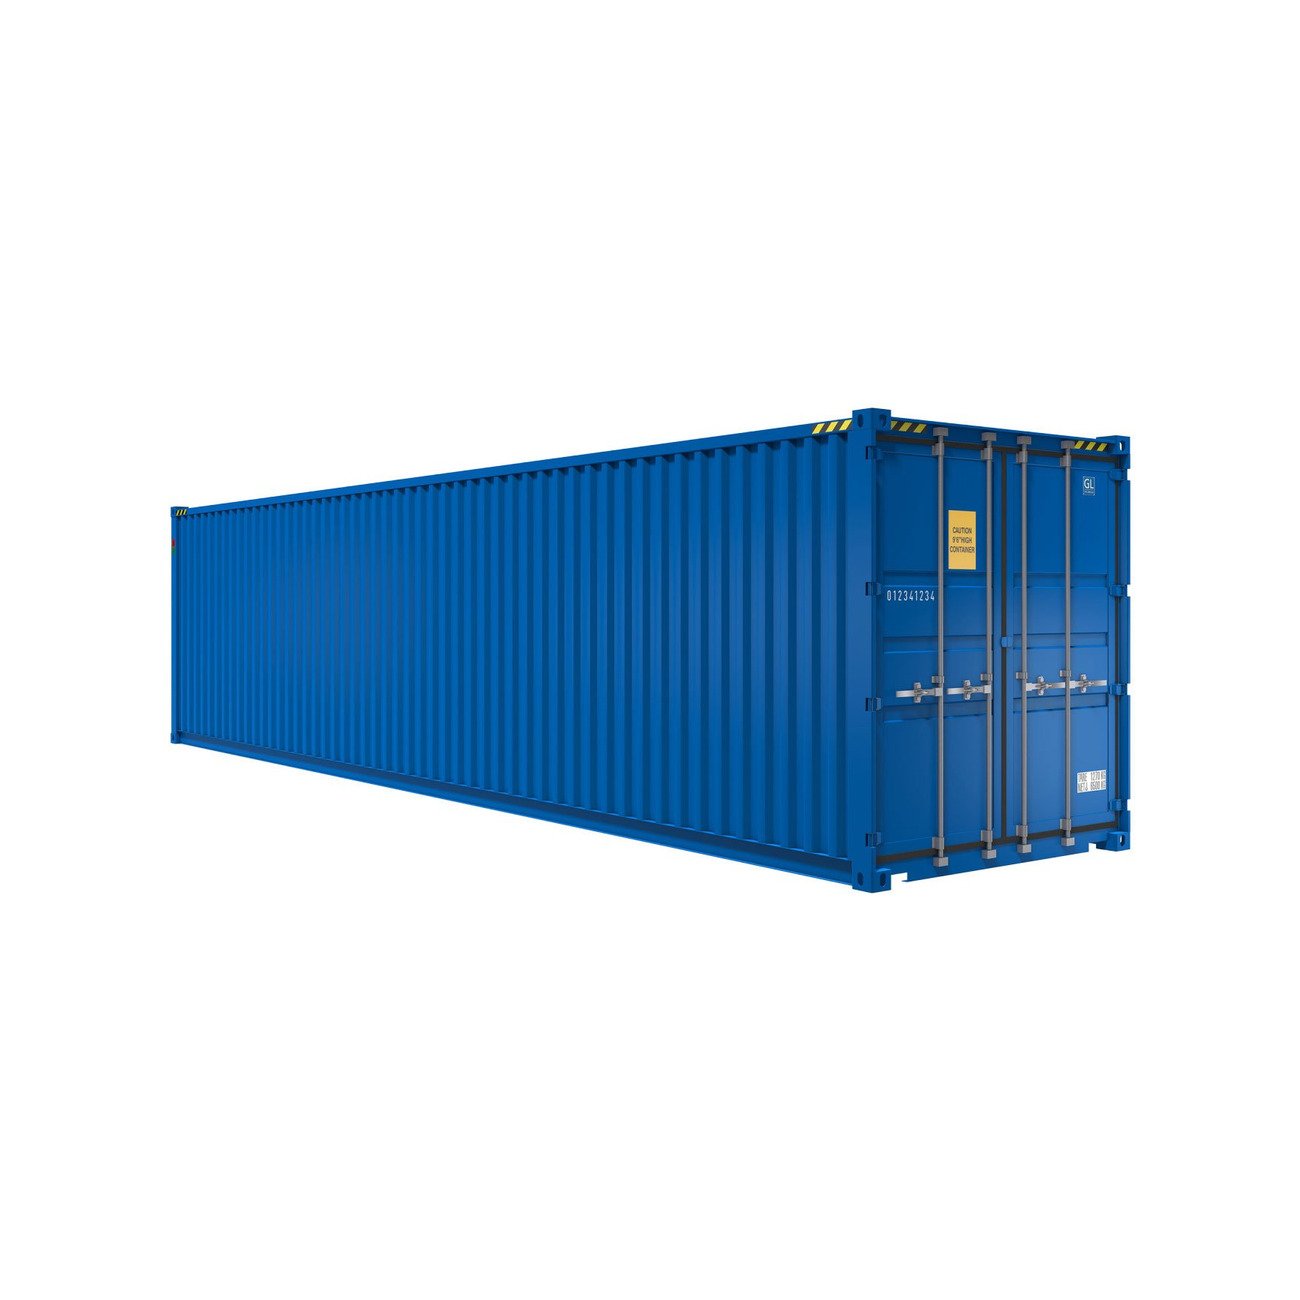 40’ HC CONTAINEX shipping container